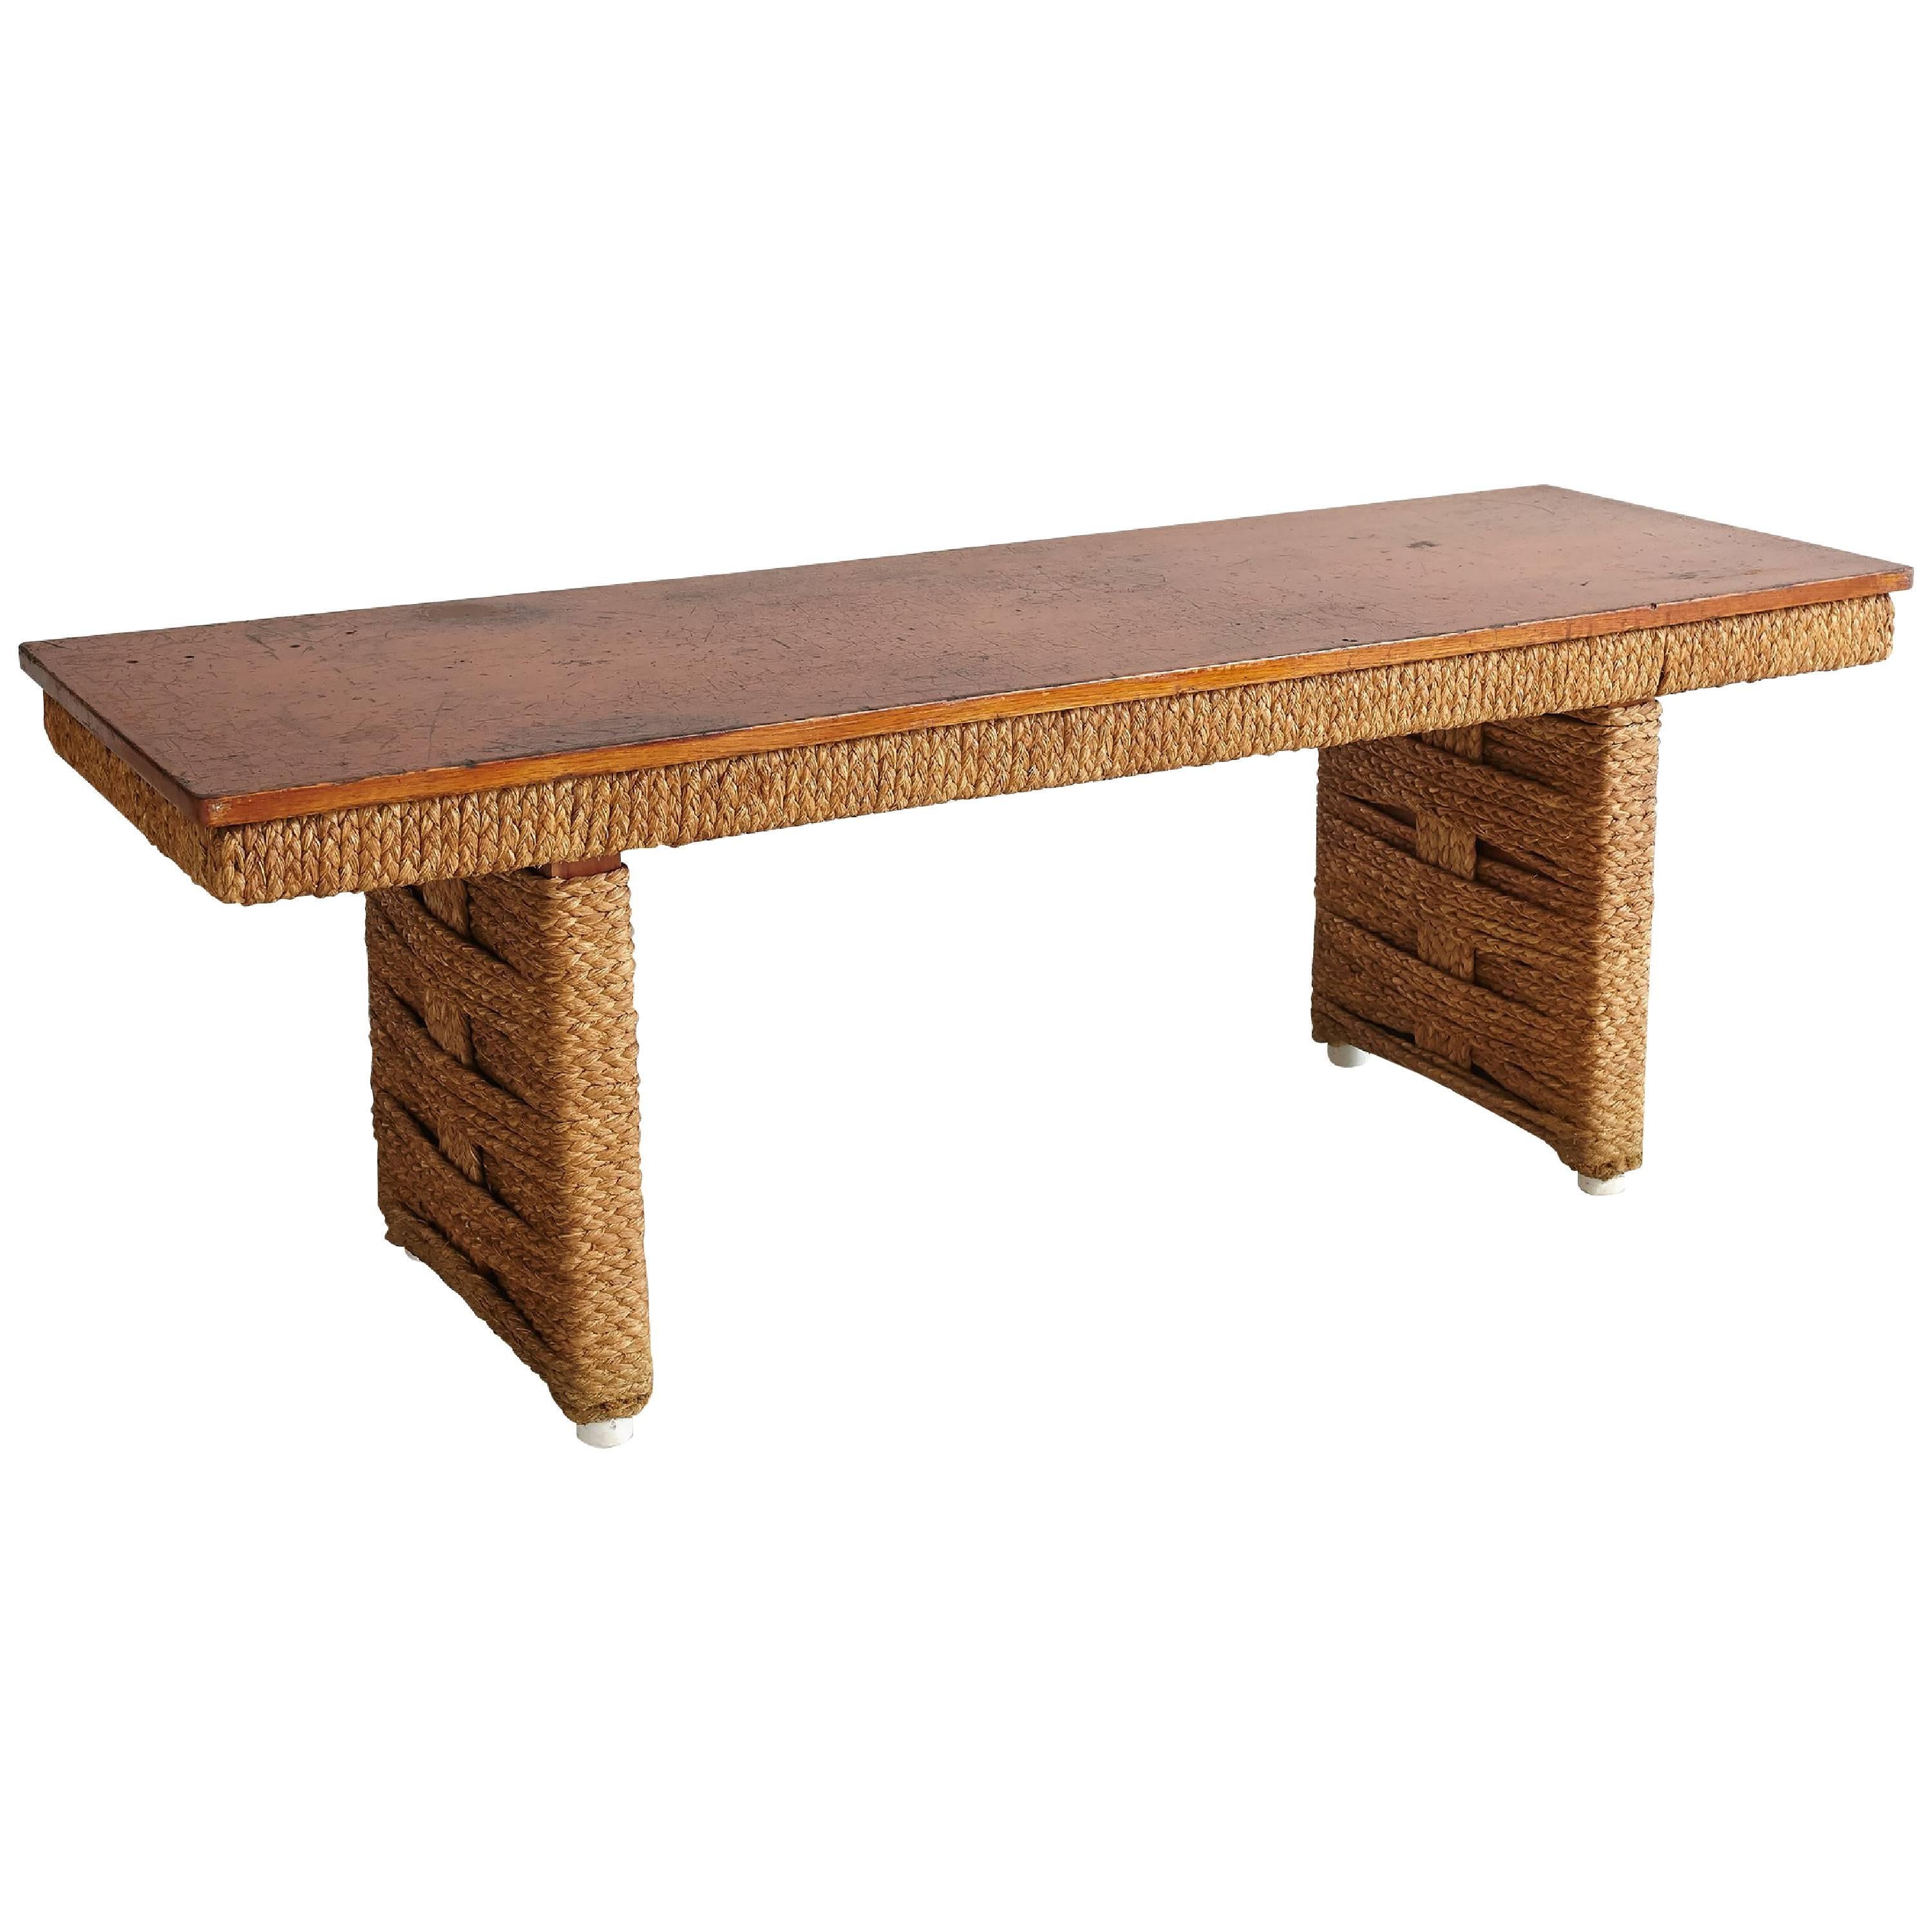 Audoux Minet Table or Bench